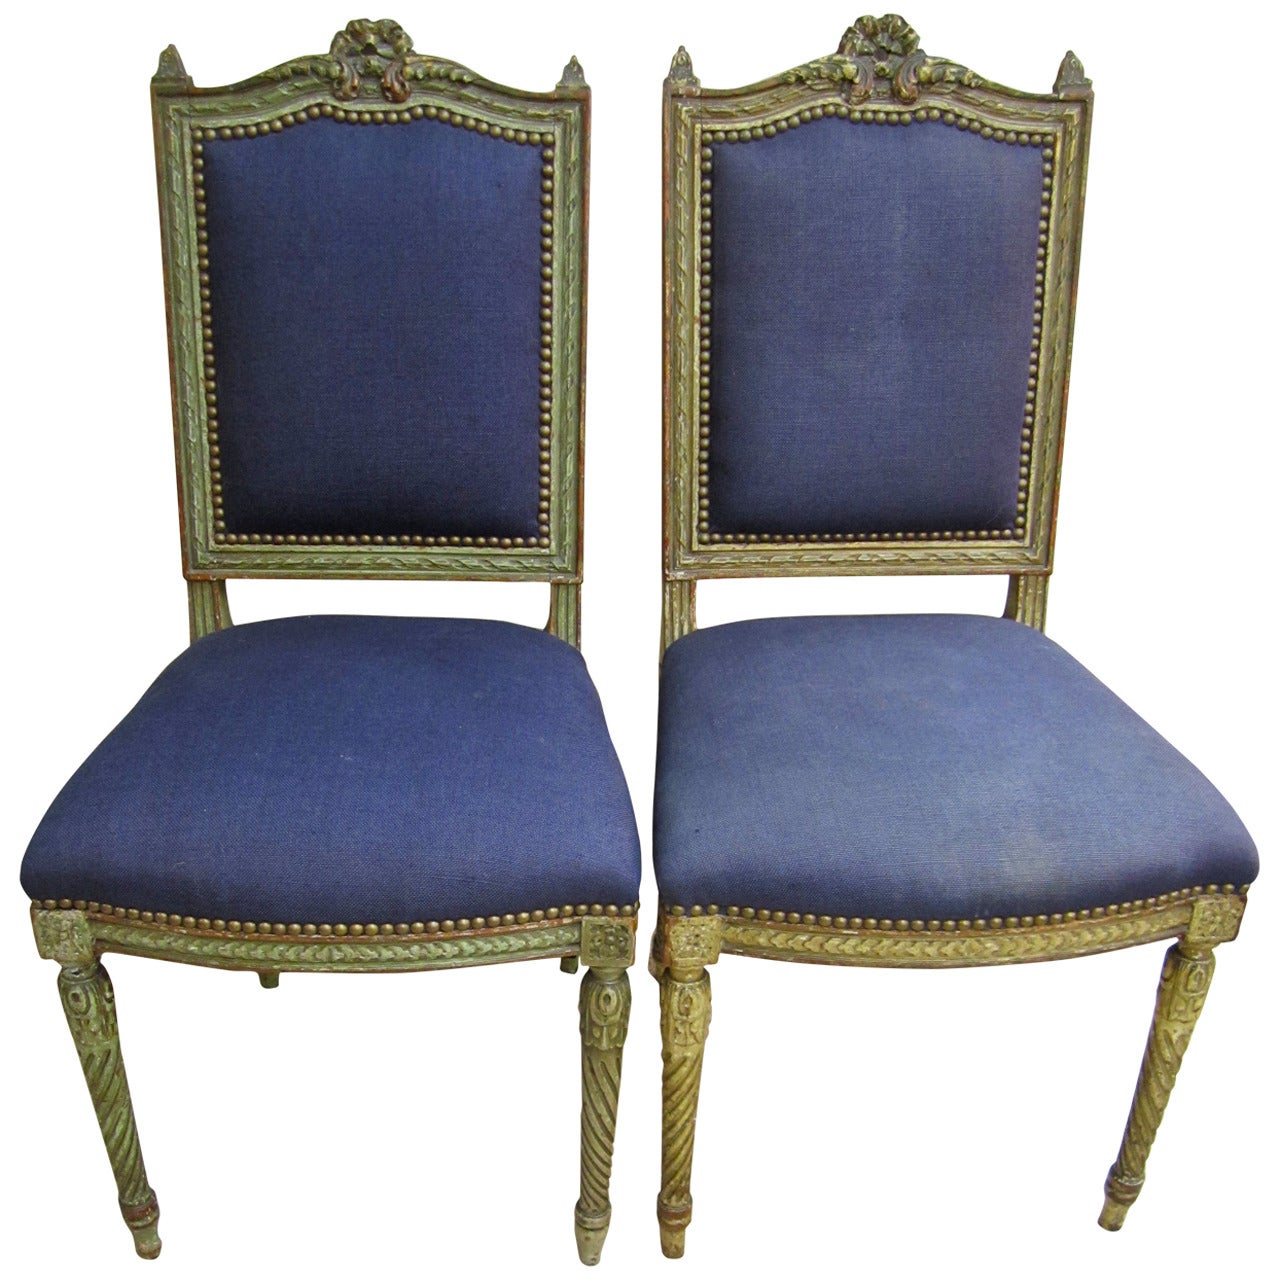 Antique French Blue and Gold Louis XVI Upholstered Side or Dining Chairs, Pair